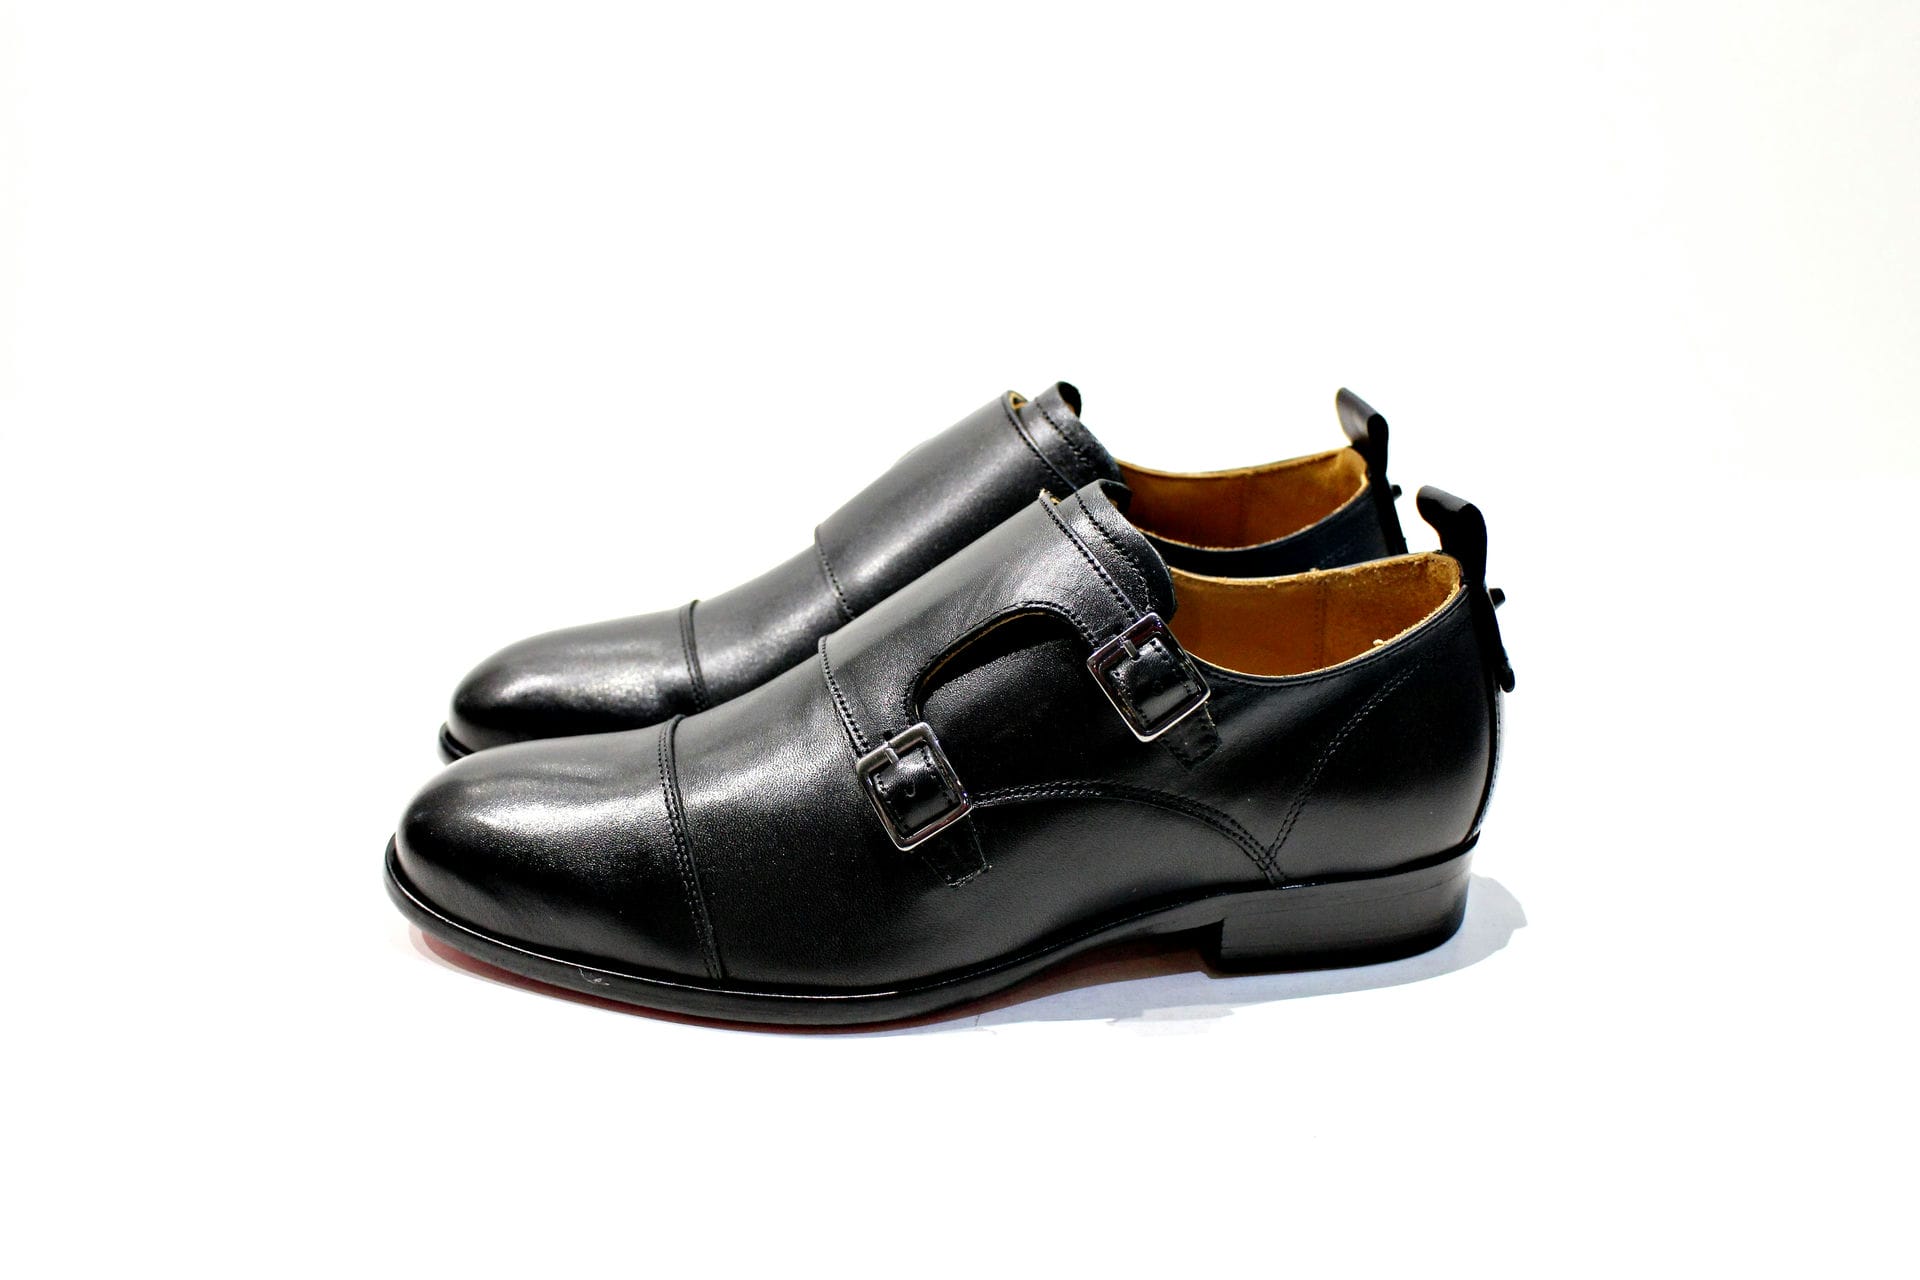 Man's shoe all composed of leather, with metal buckles. Handmade in Portugal. “Walk with Pintta